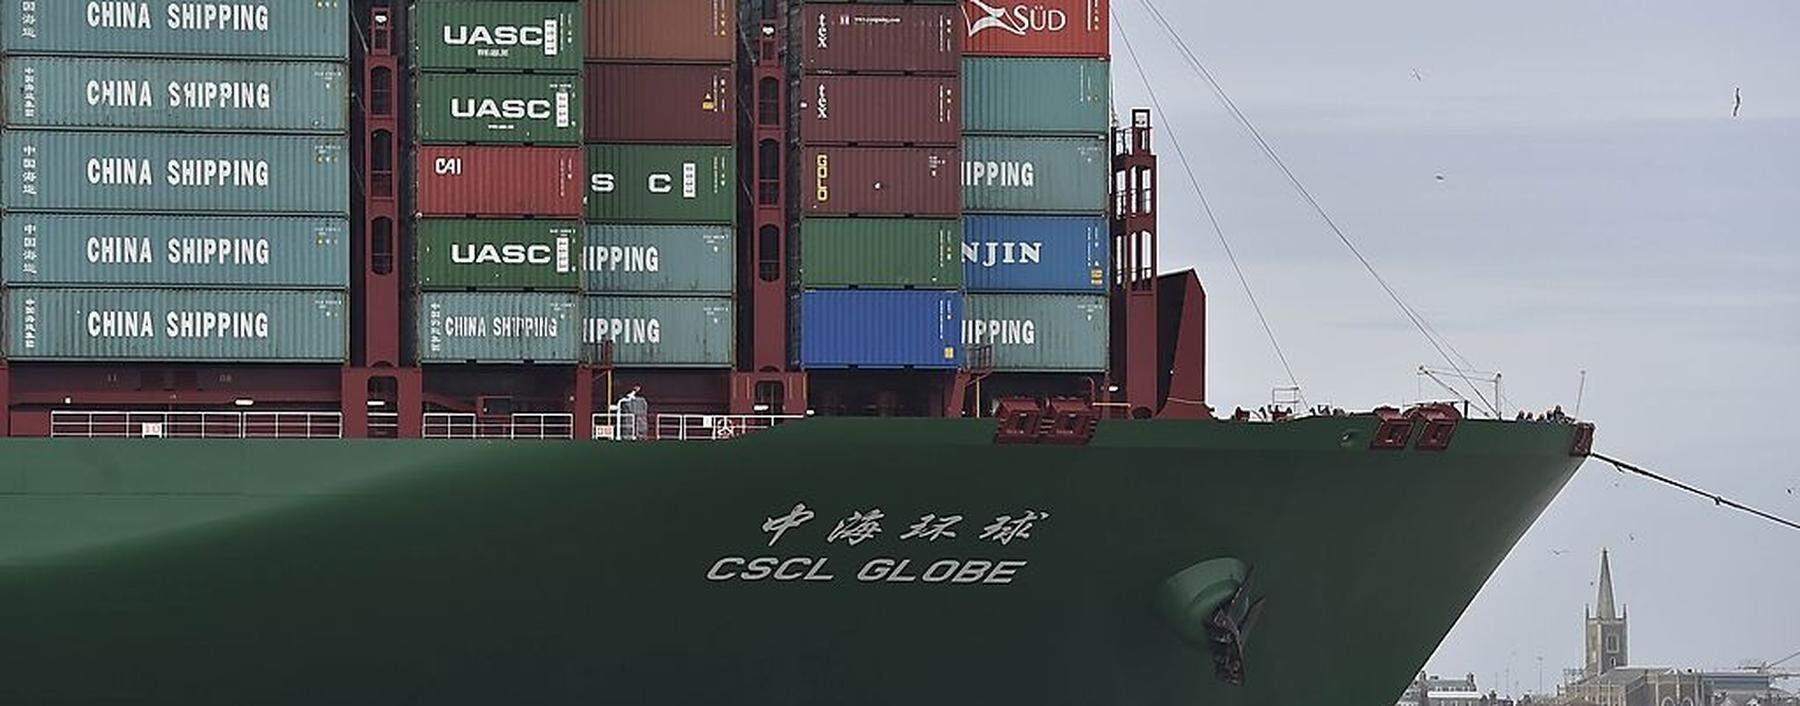 The largest container ship in world, CSCL Globe, docks during its maiden voyage, at the port of Felixstowe in south east England